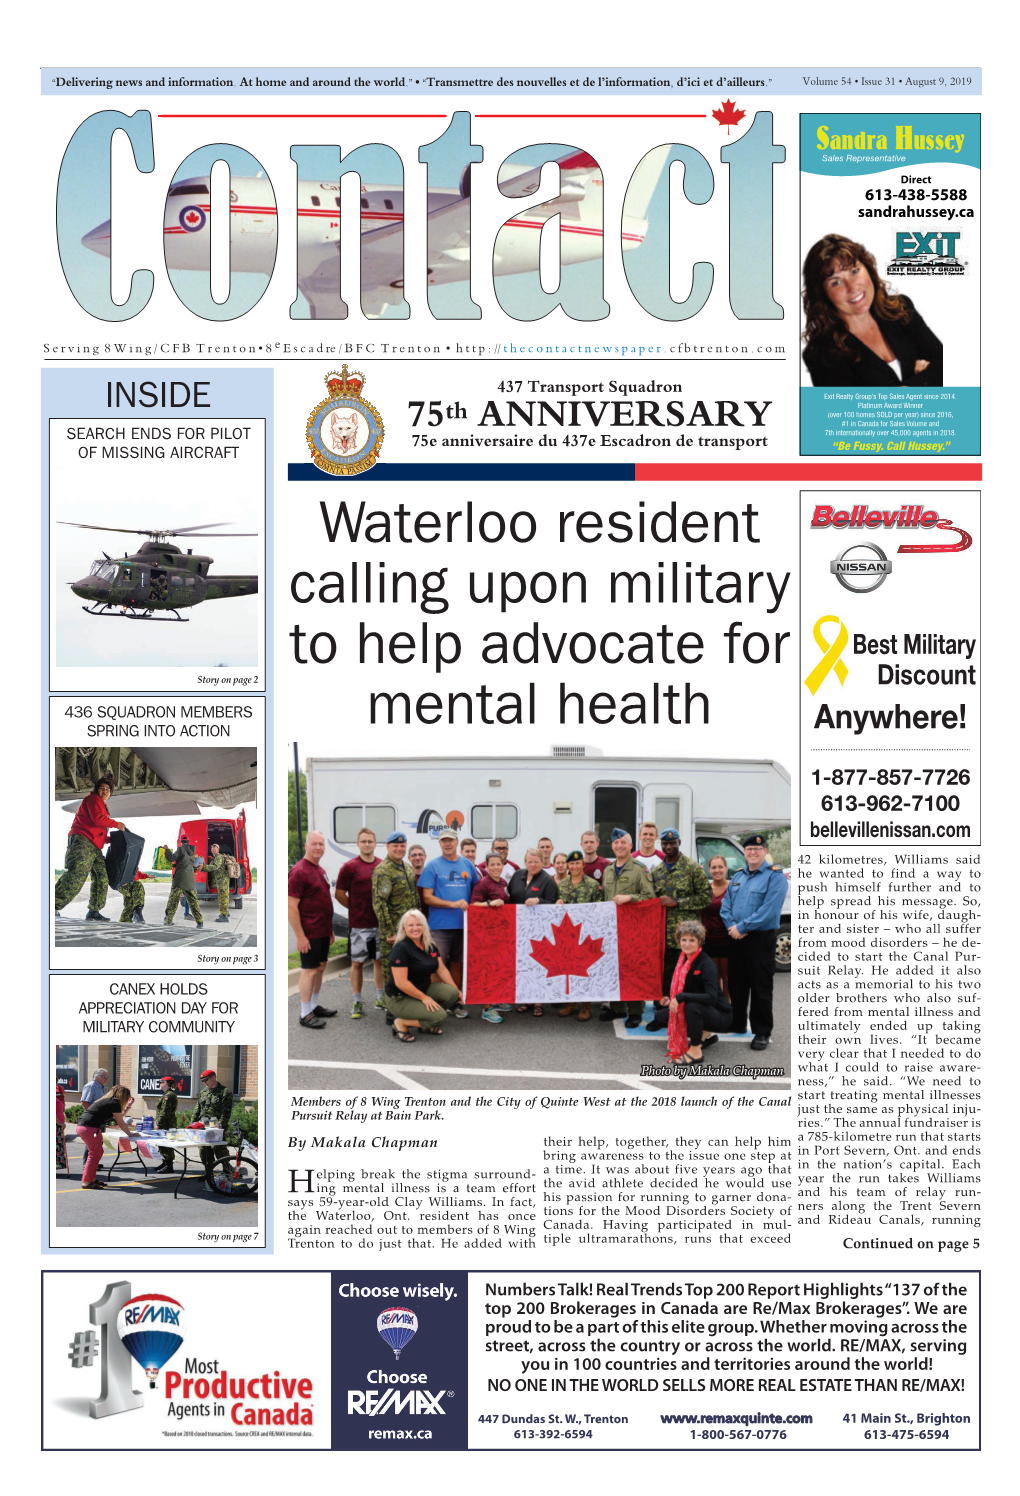 Waterloo Resident Calling Upon Military to Help Advocate for Mental Health